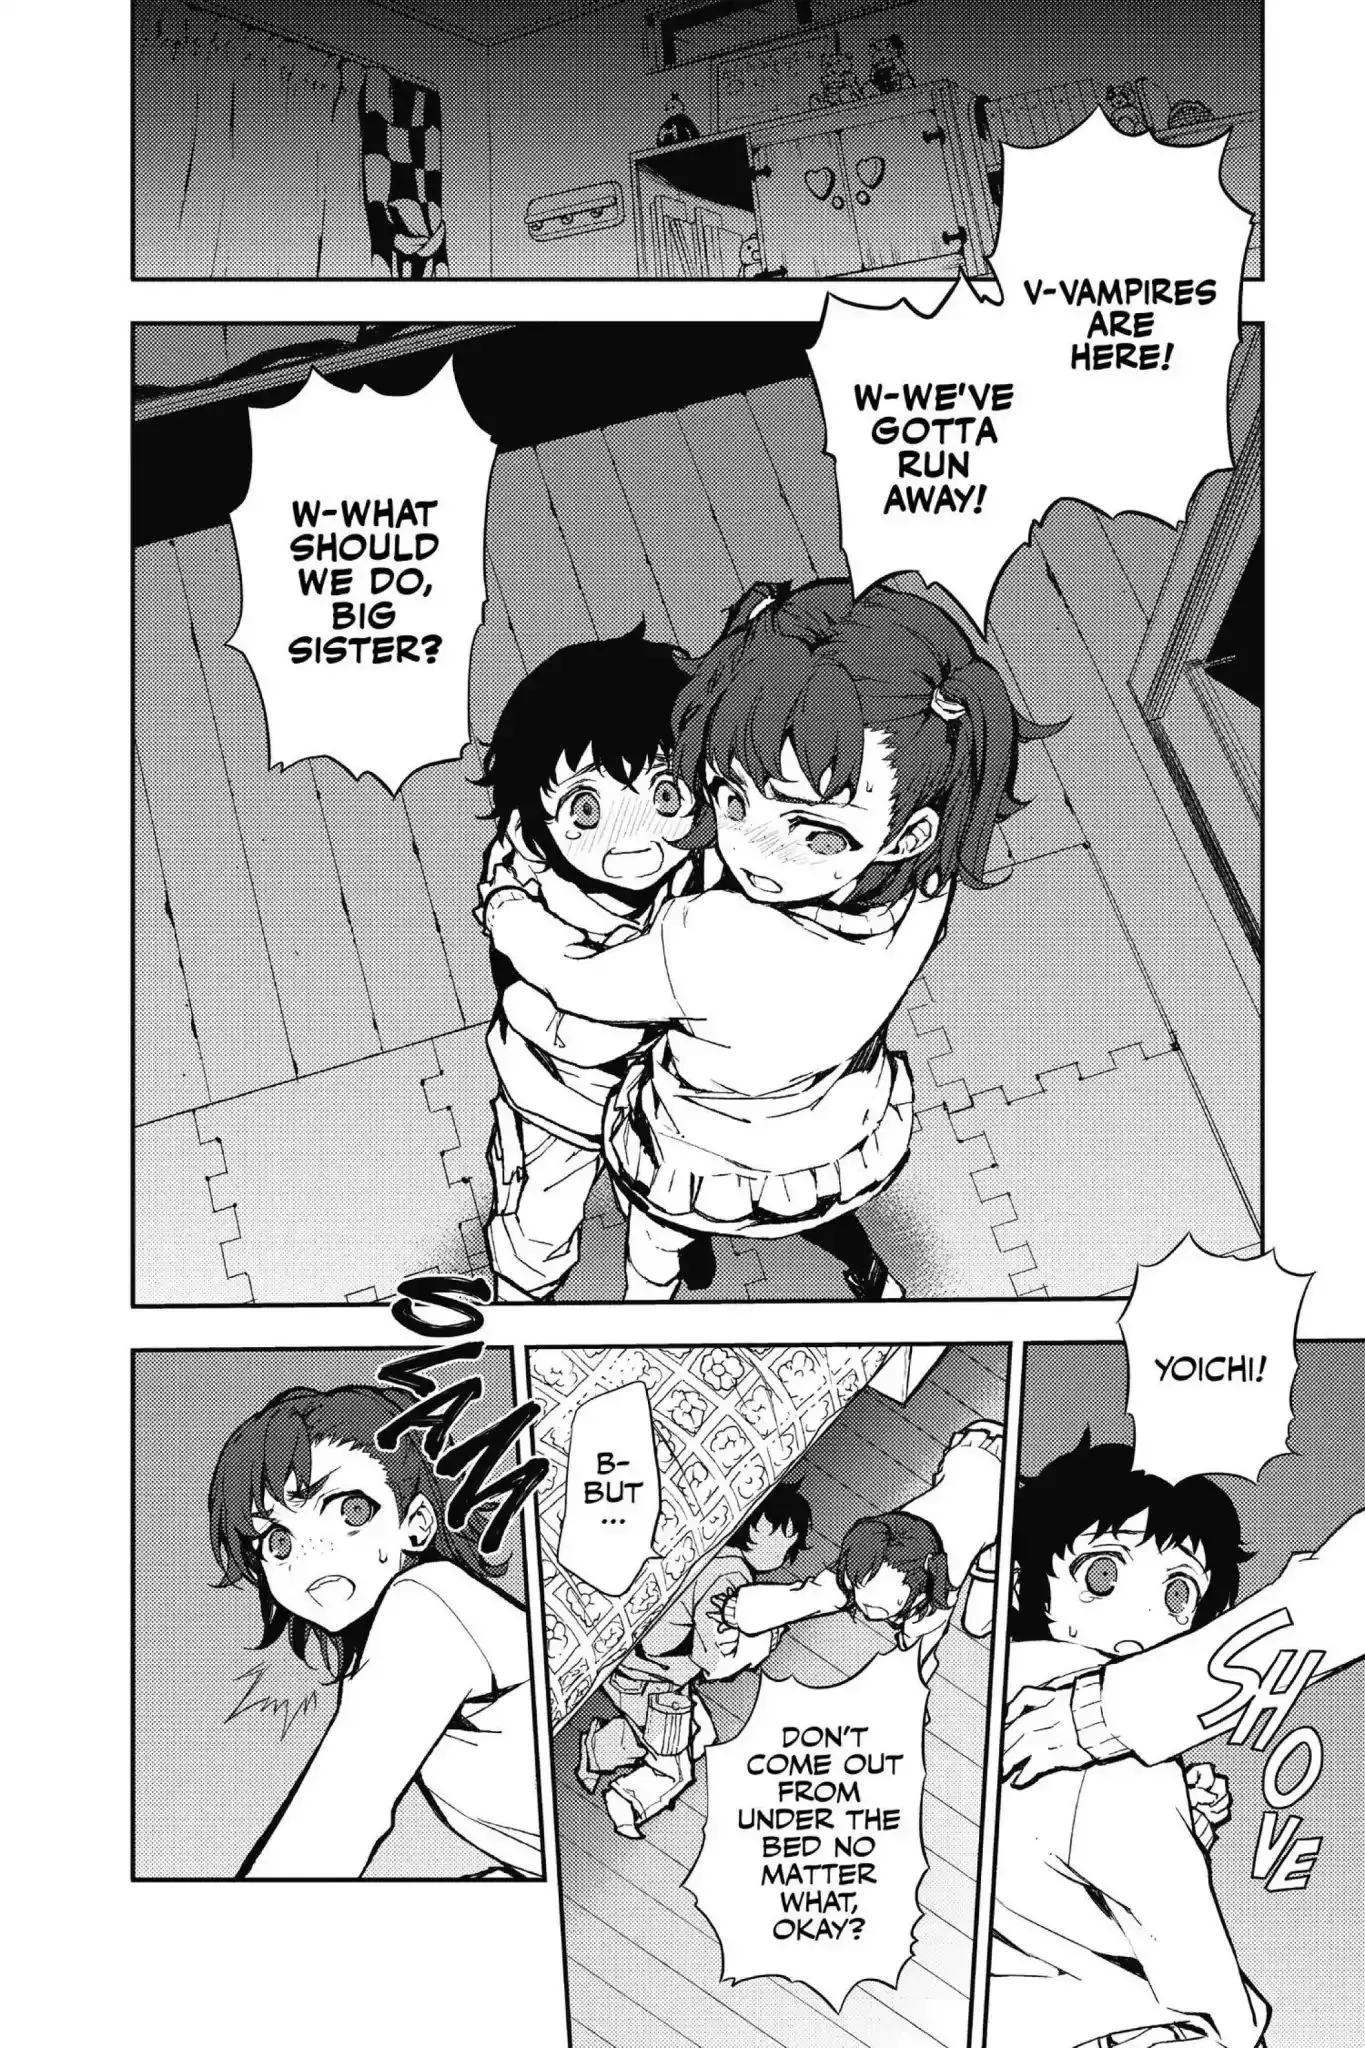 Seraph Of The End - 7 page 2-51fa5d03